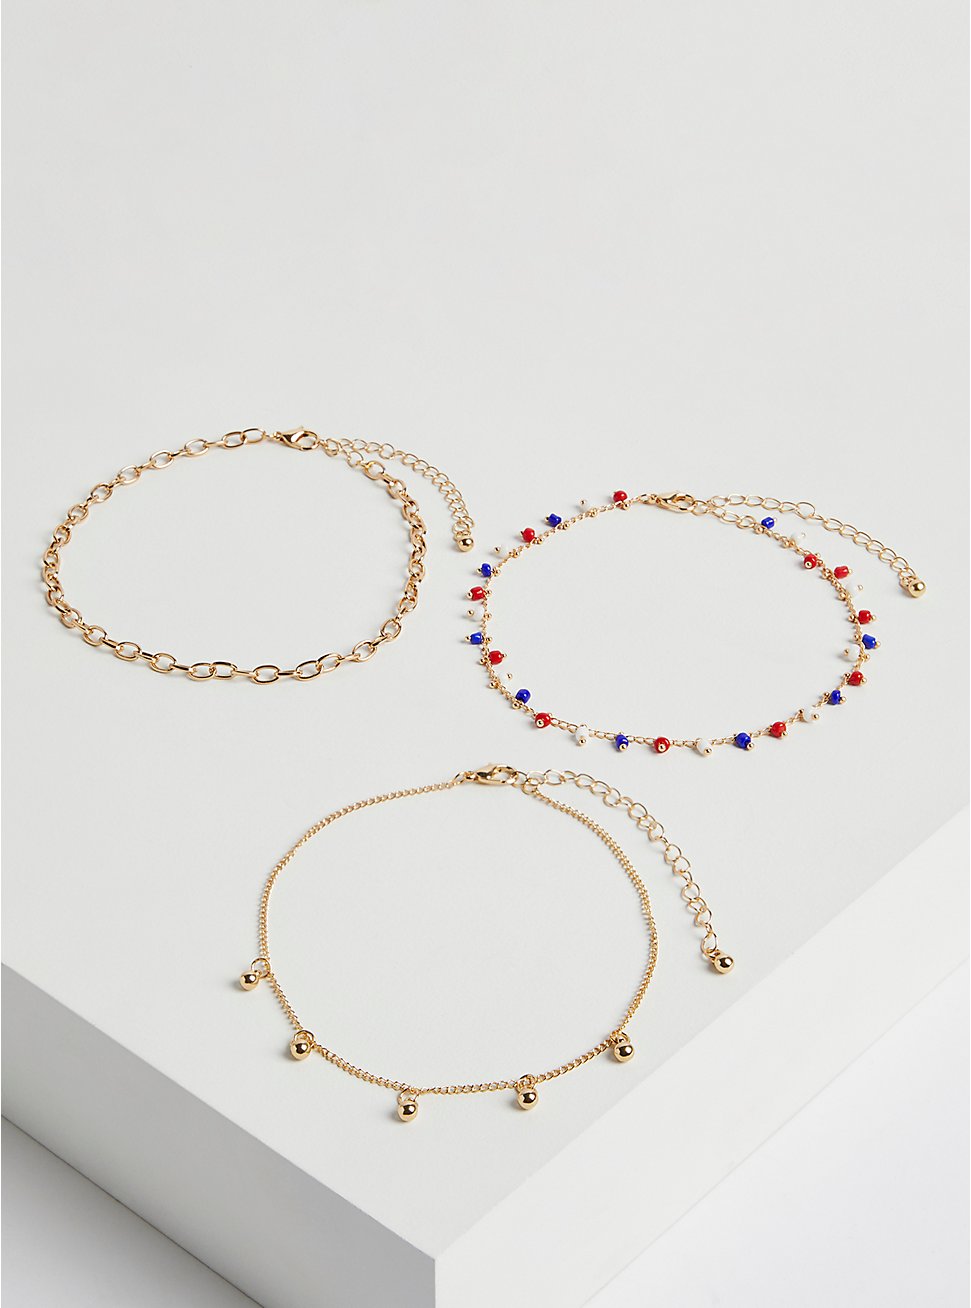 Red White & Blue Beaded Anklets Set of 3 - Gold Tone, , hi-res